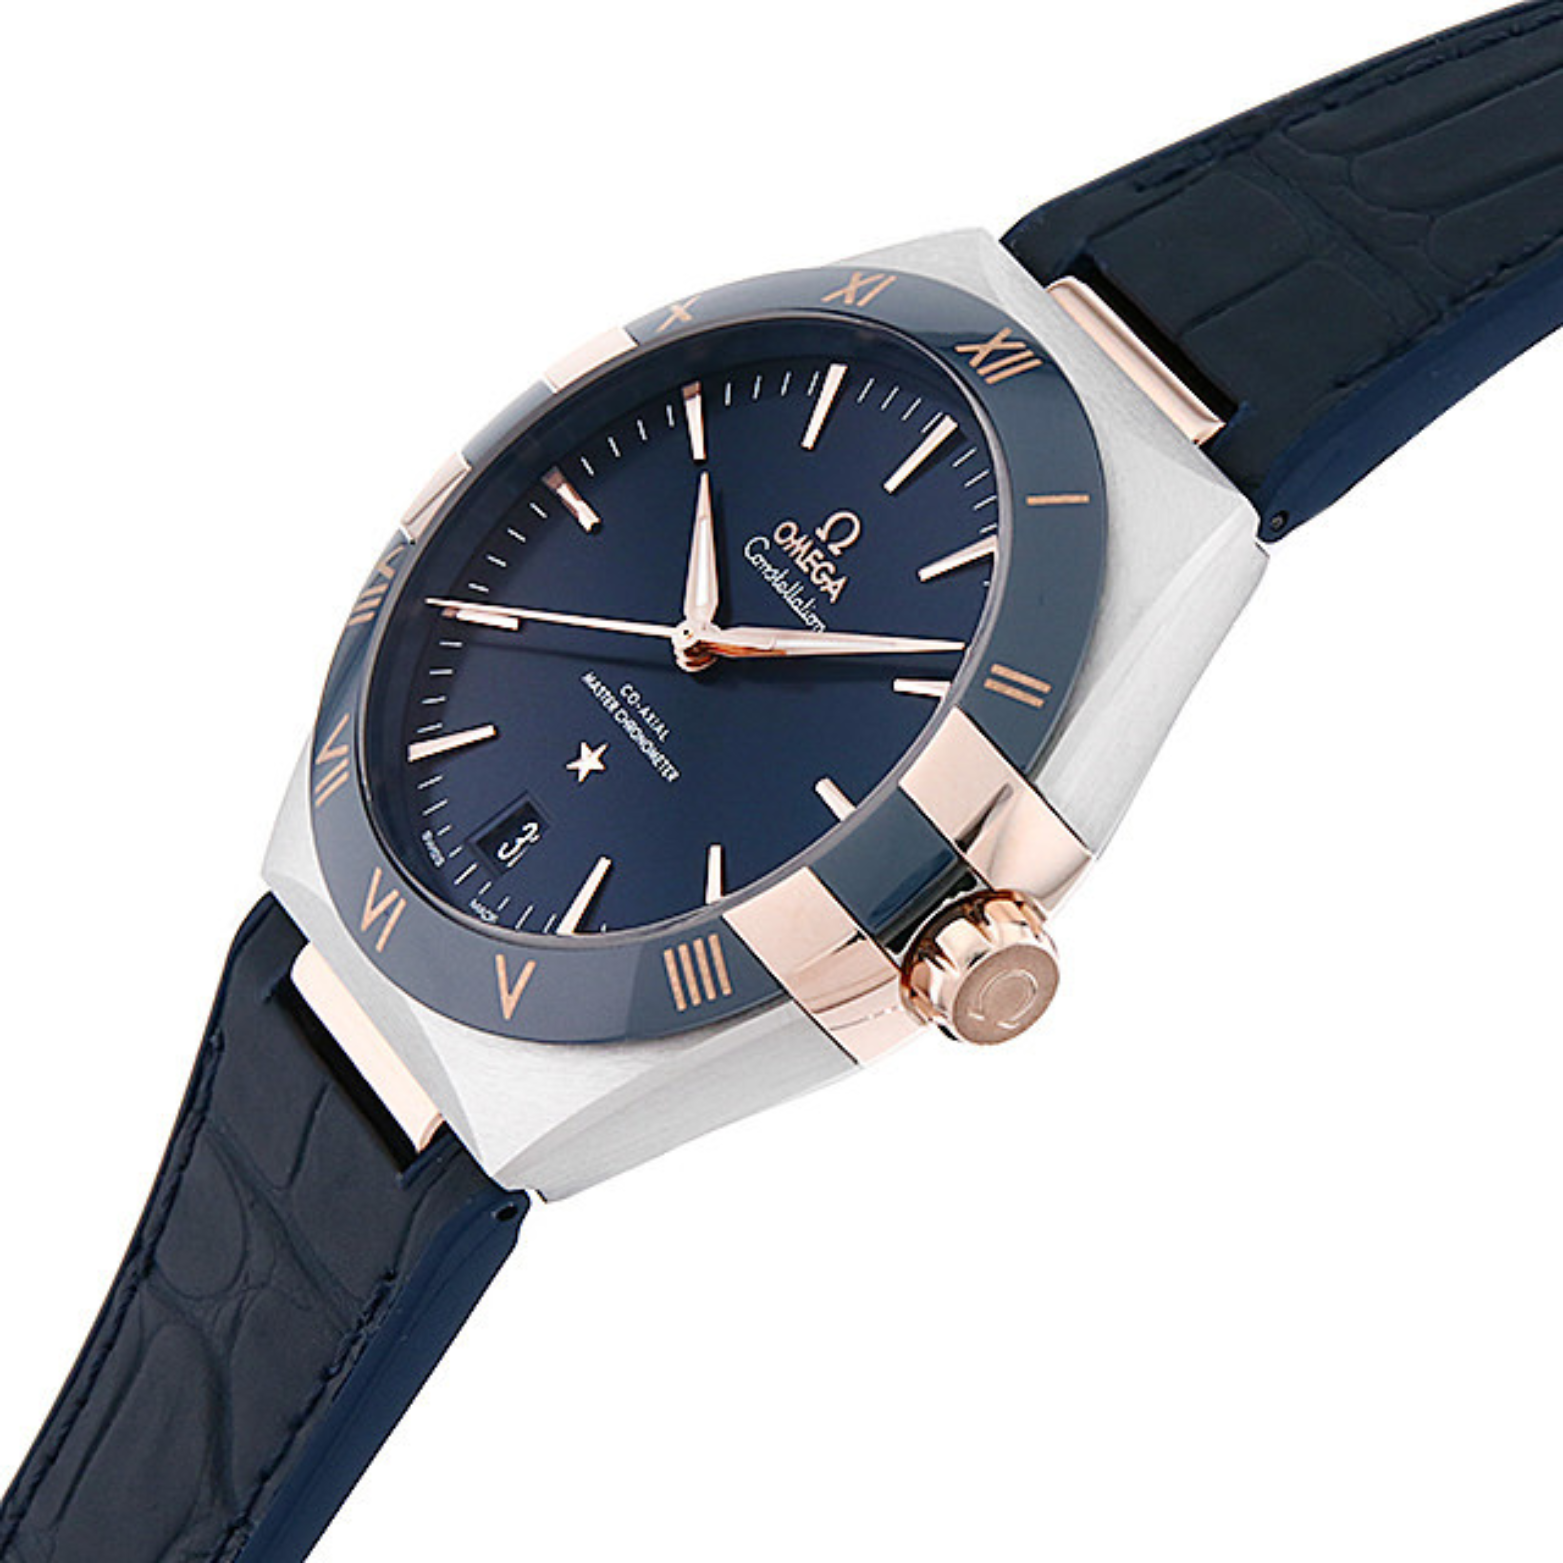 Omega Constellation Co‑axial Master Chronometer 131.23.41.21.03.001